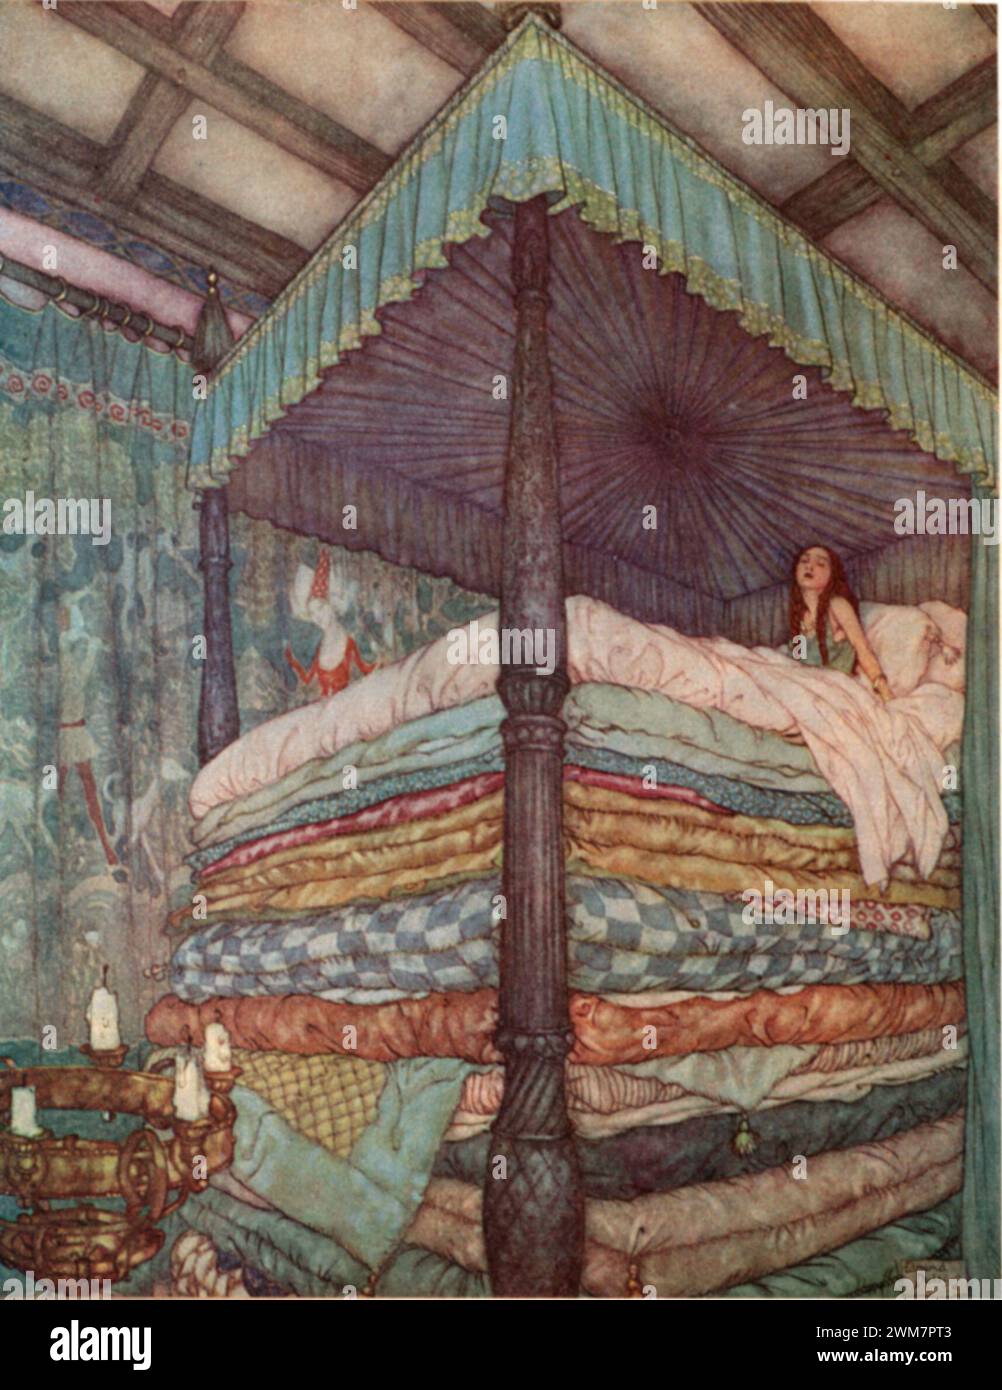 Princess and the Pea, Colour Print lithograph by Edmund Dulac 1930s, Stock Photo